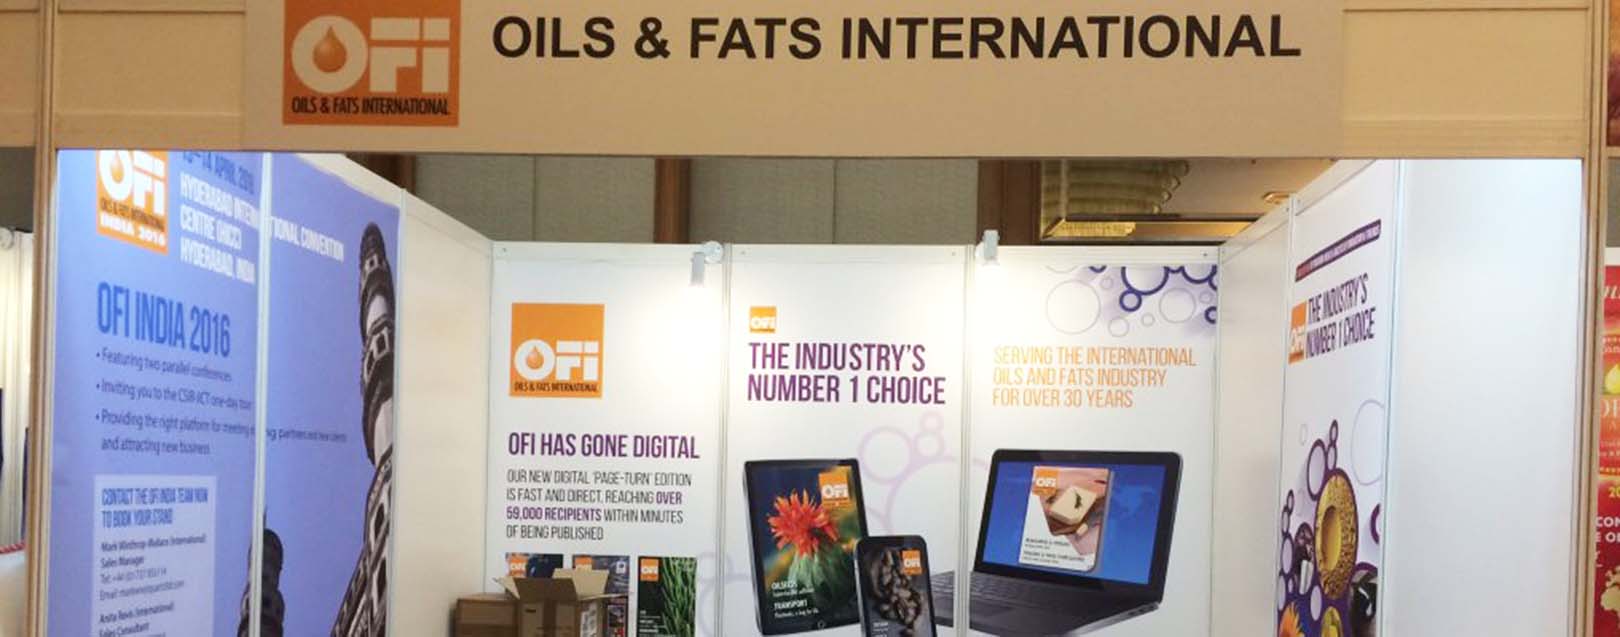 Global oils & fats event held first time in India